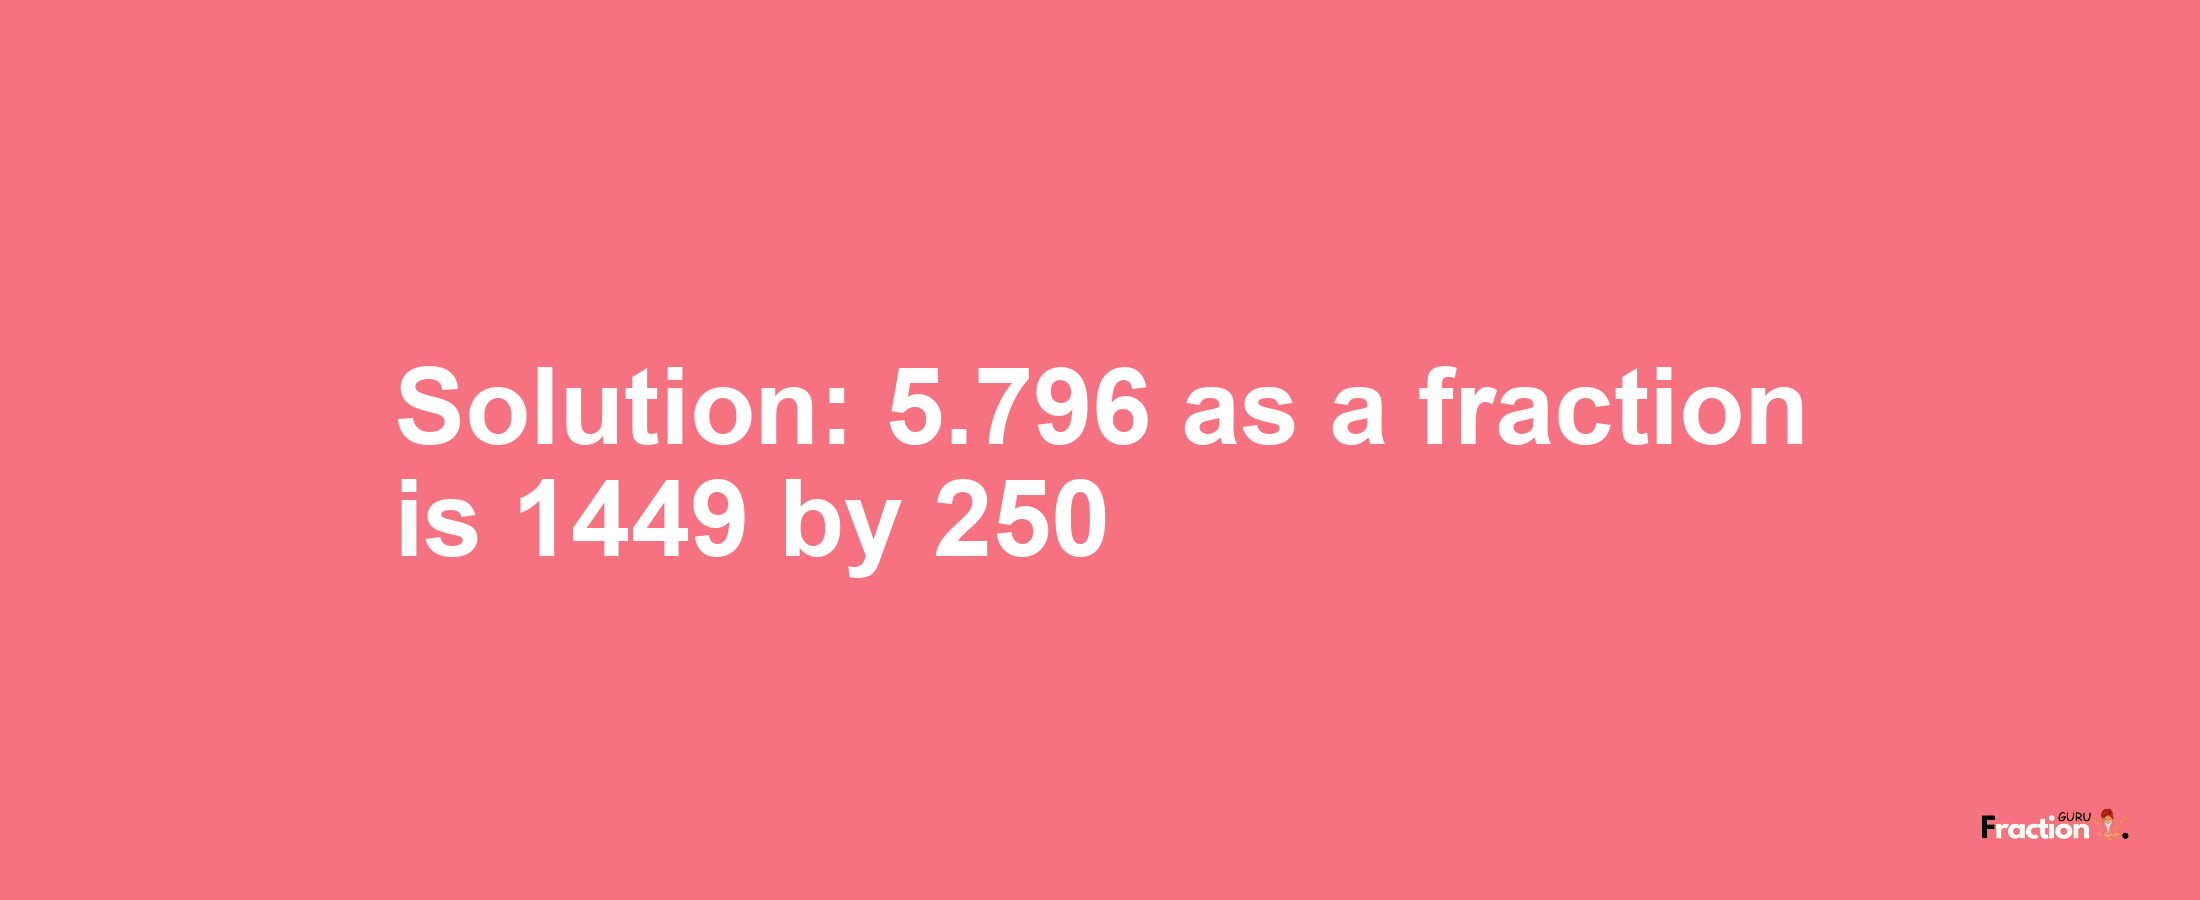 Solution:5.796 as a fraction is 1449/250